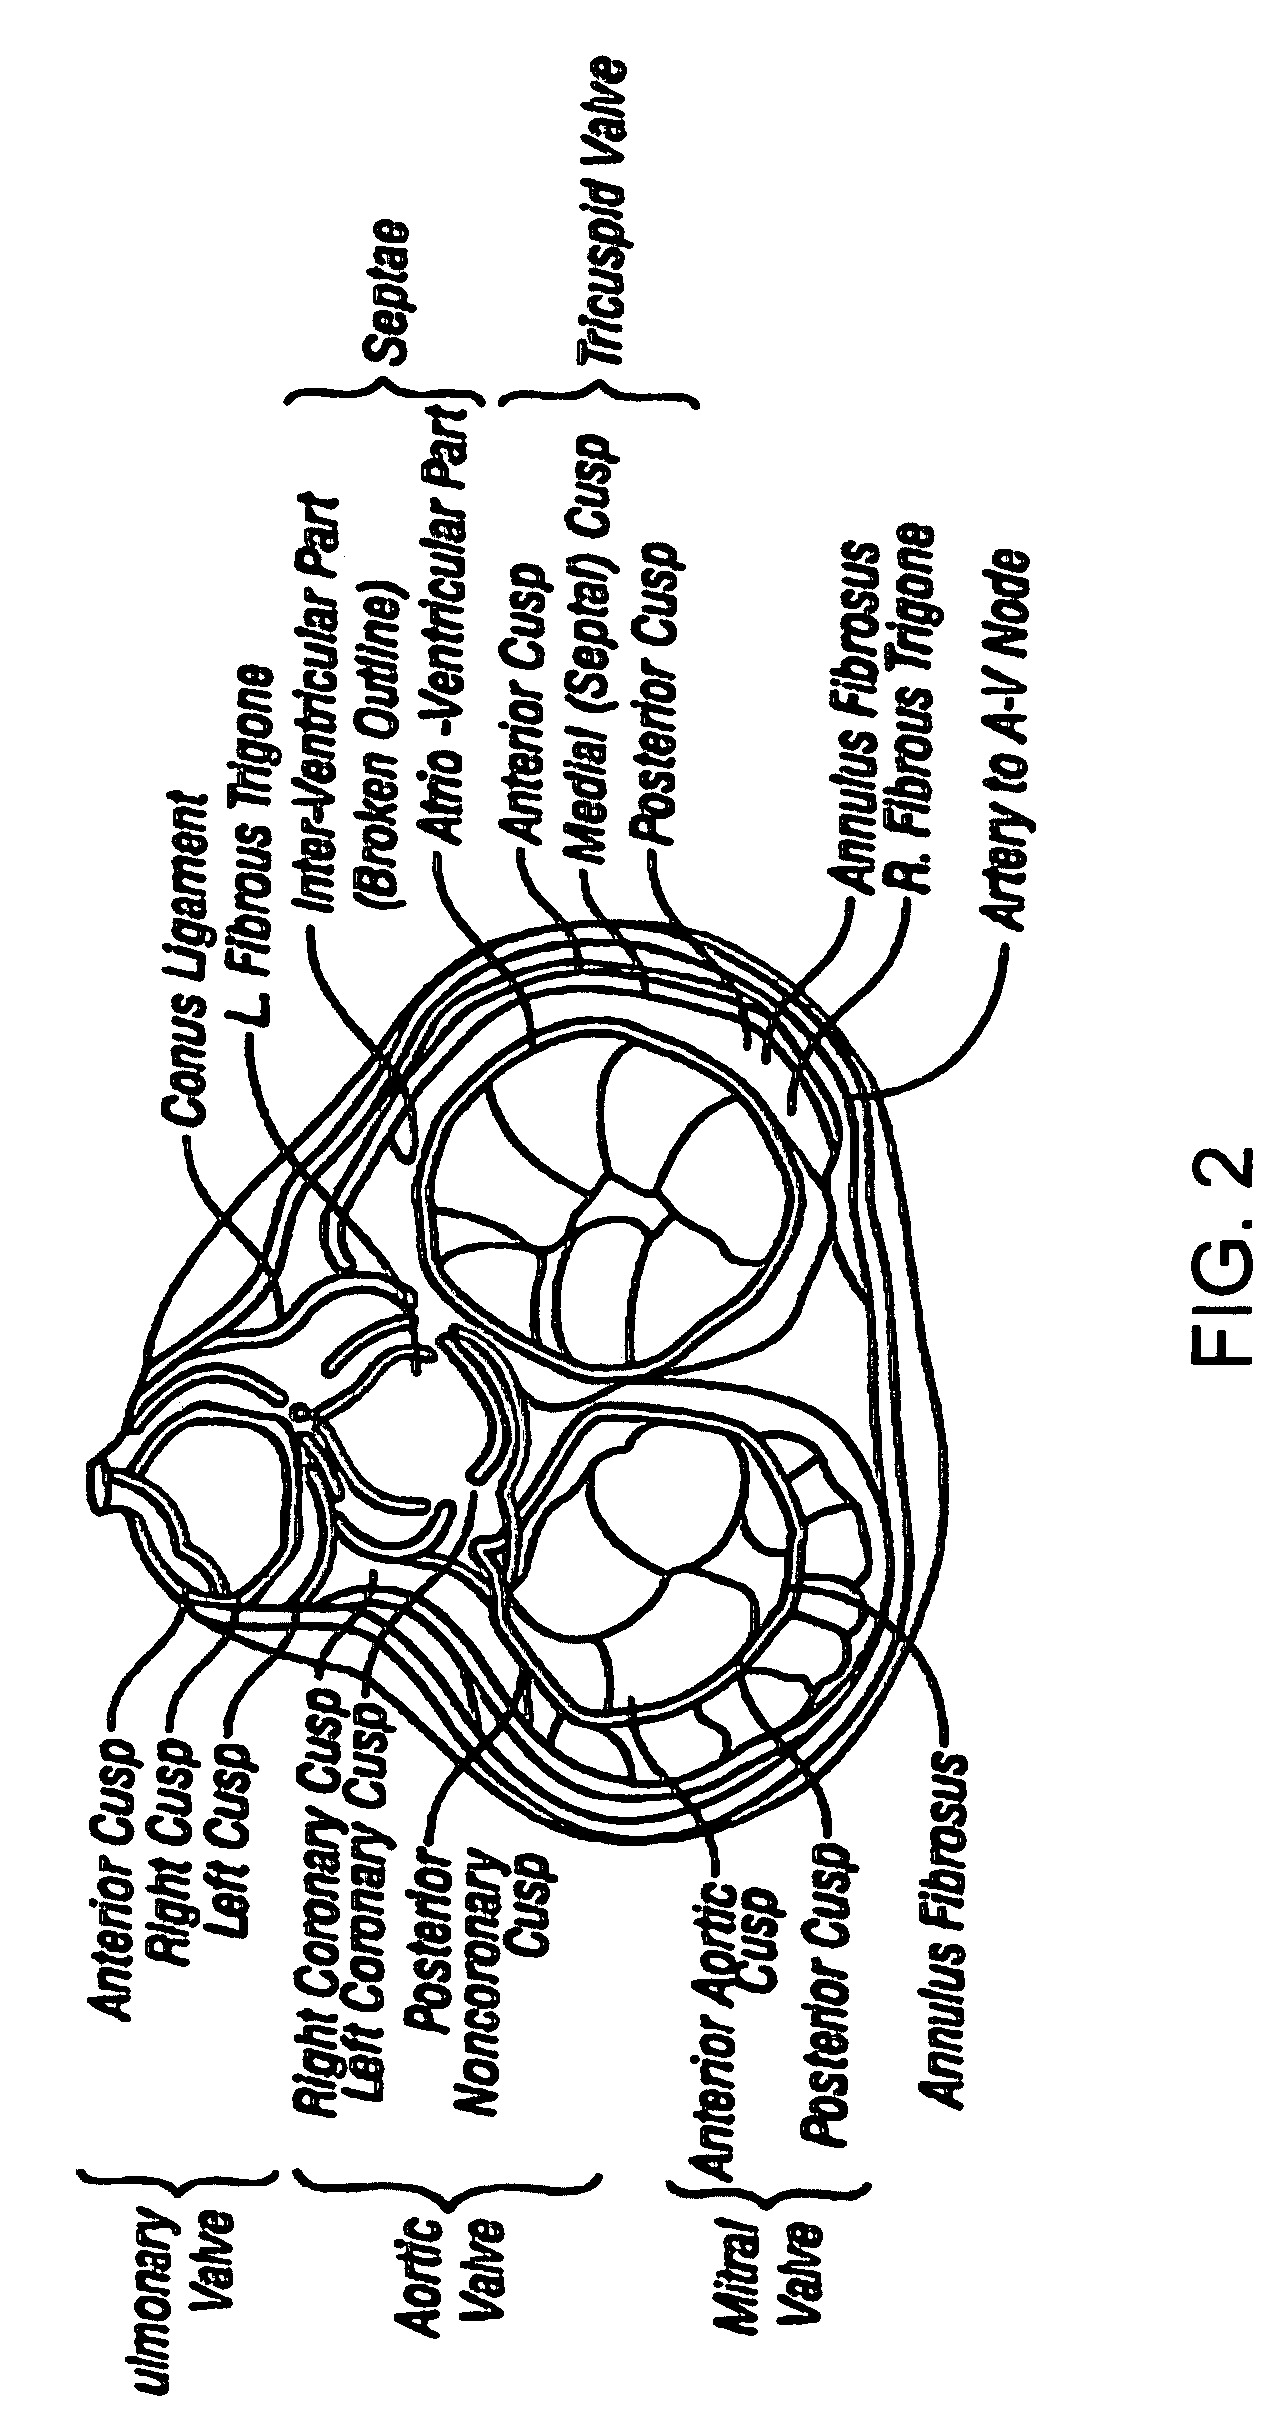 Heart band with fillable chambers to modify heart valve function